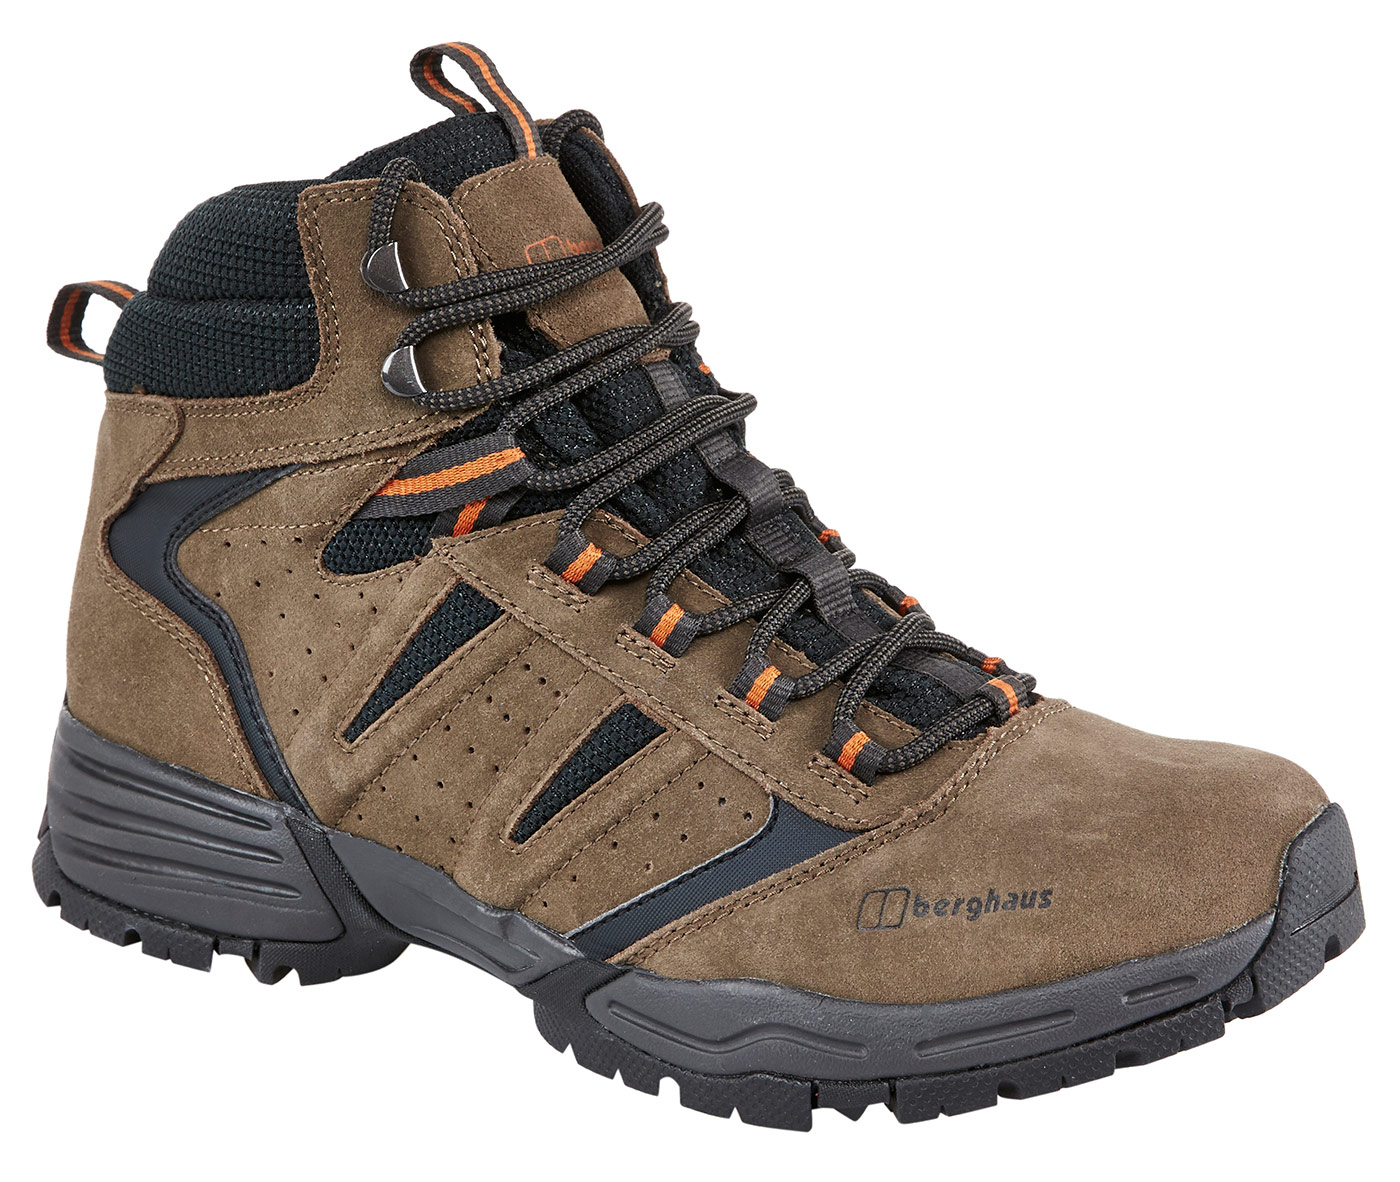 berghaus safety boots